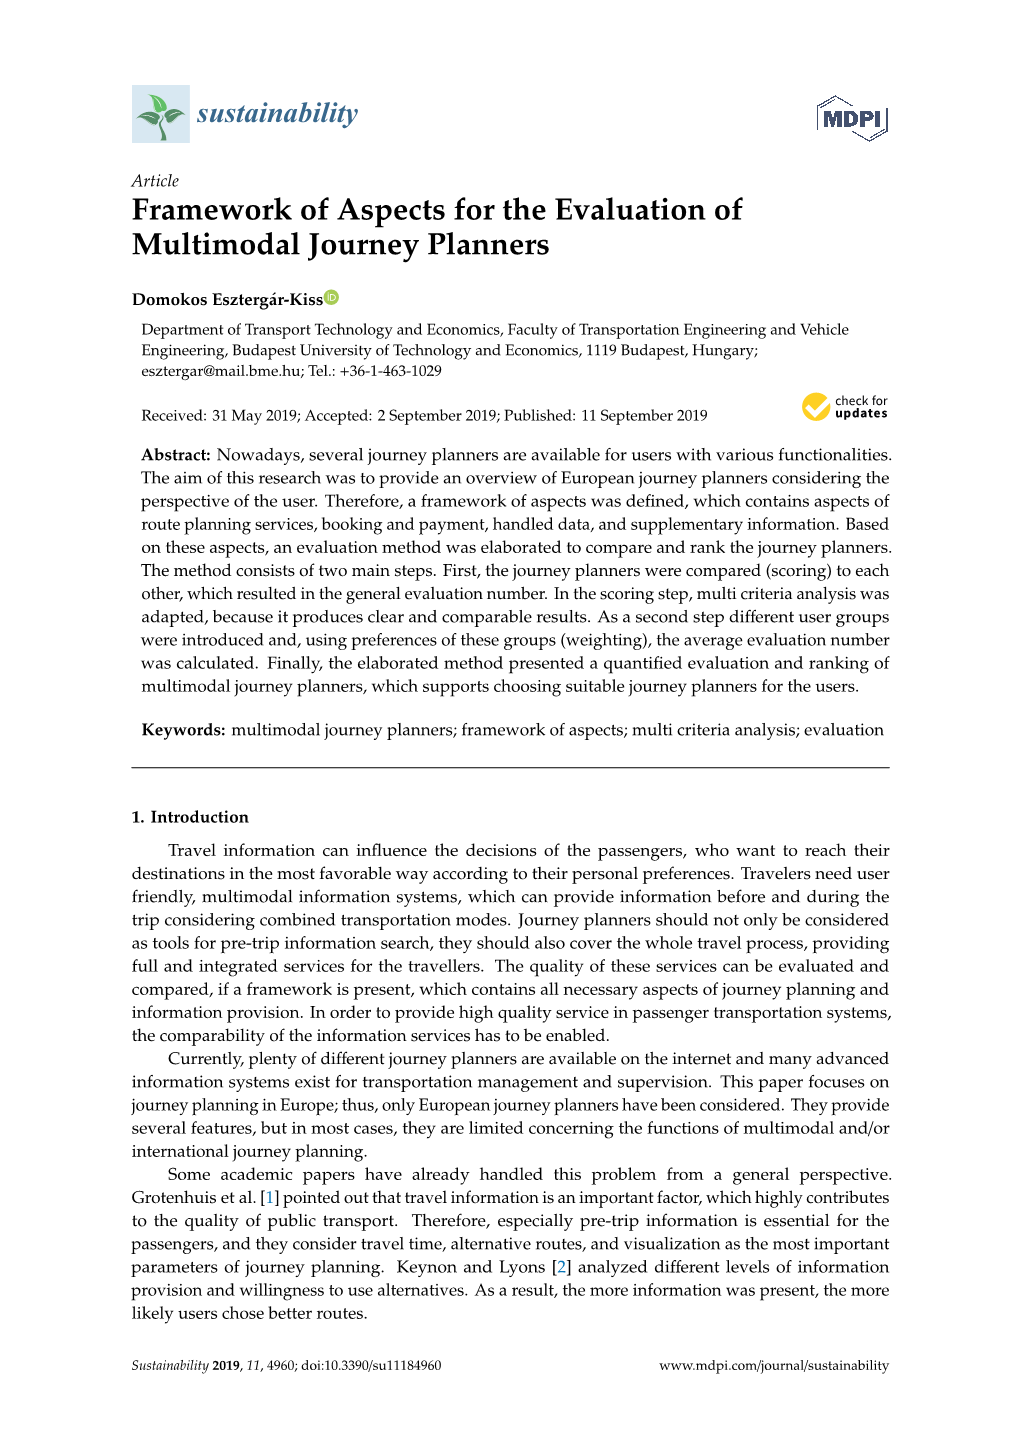 Framework of Aspects for the Evaluation of Multimodal Journey Planners